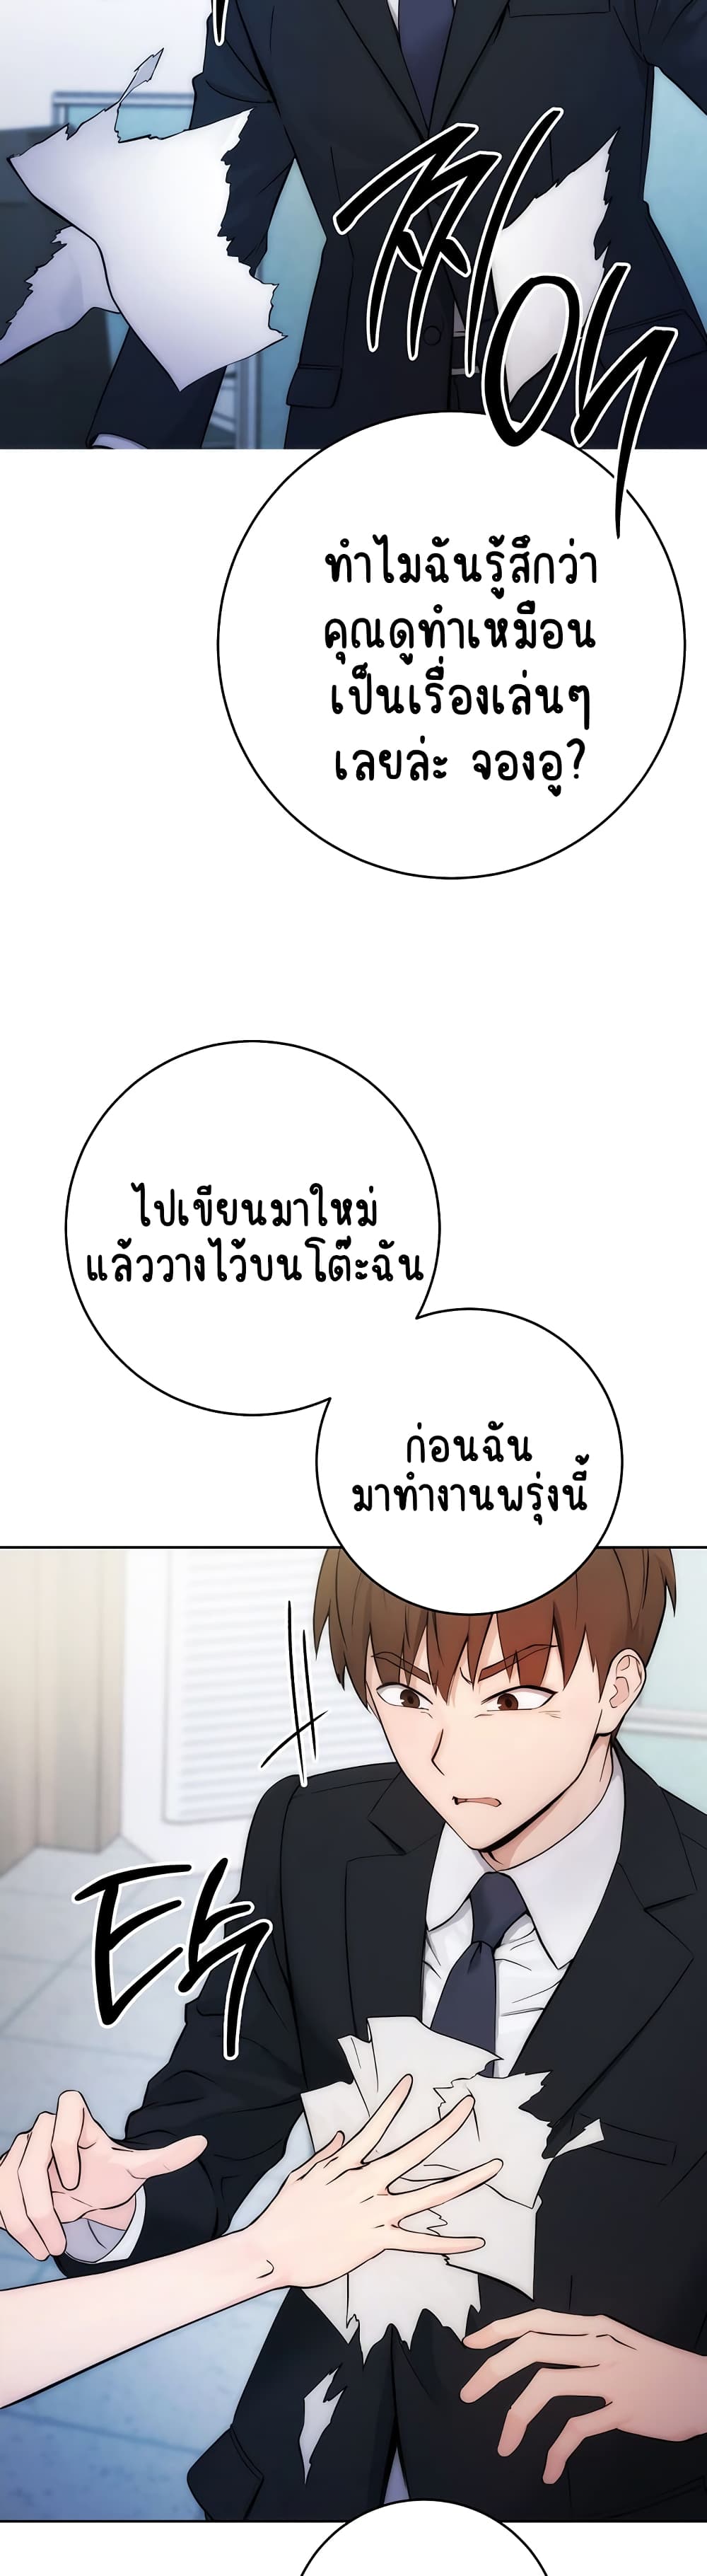 Outsider: The Invisible Man ตอนที่ 1 ภาพ 26